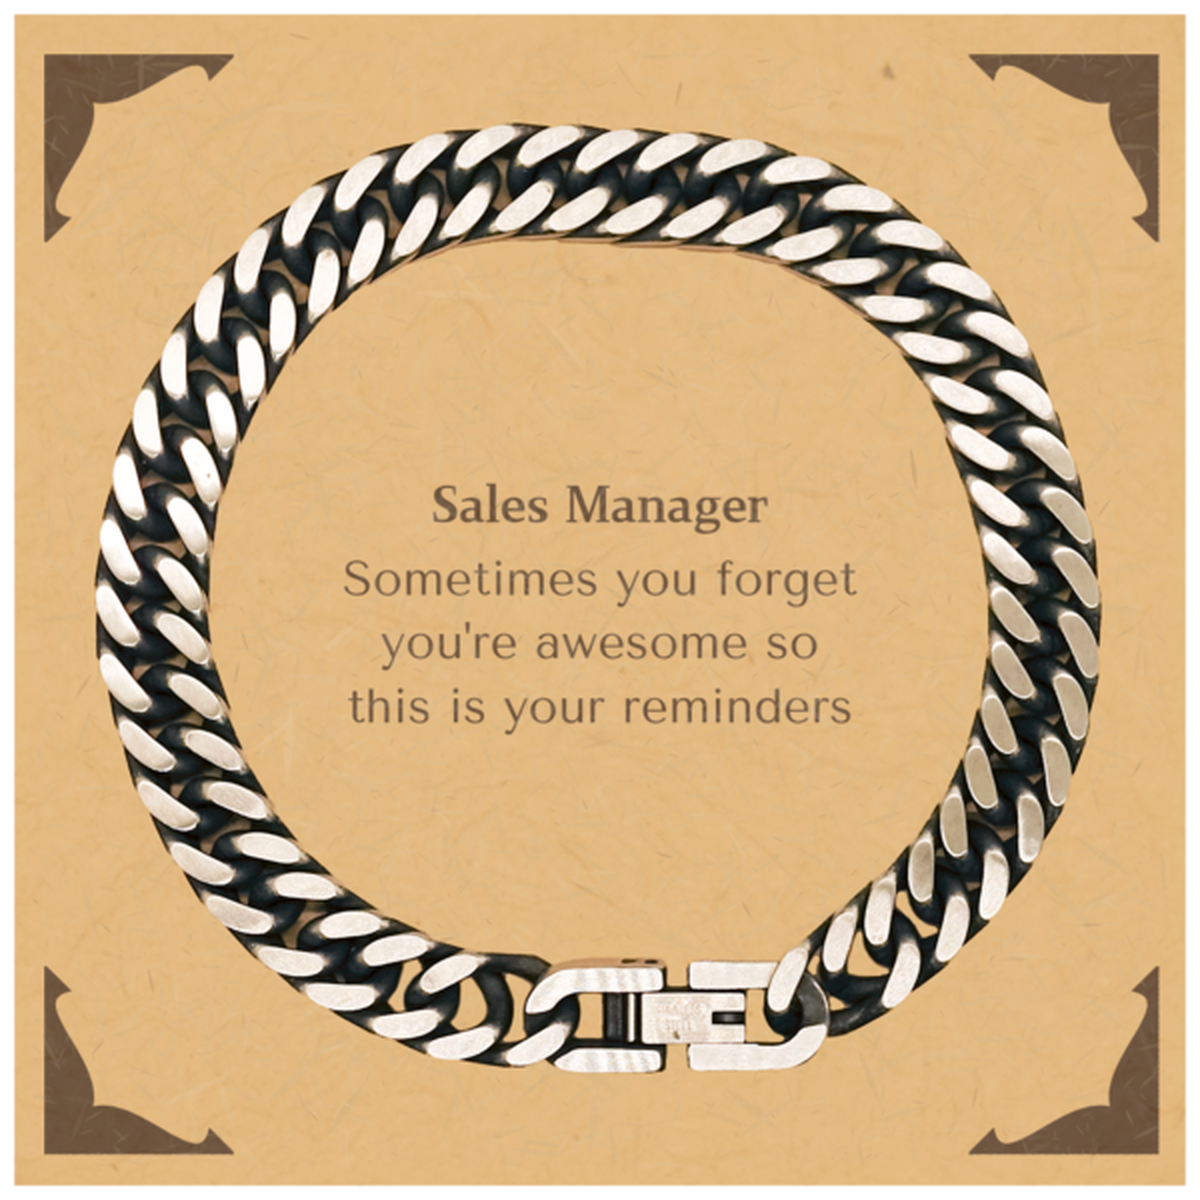 Sentimental Sales Manager Cuban Link Chain Bracelet, Sales Manager Sometimes you forget you're awesome so this is your reminders, Graduation Christmas Birthday Gifts for Sales Manager, Men, Women, Coworkers